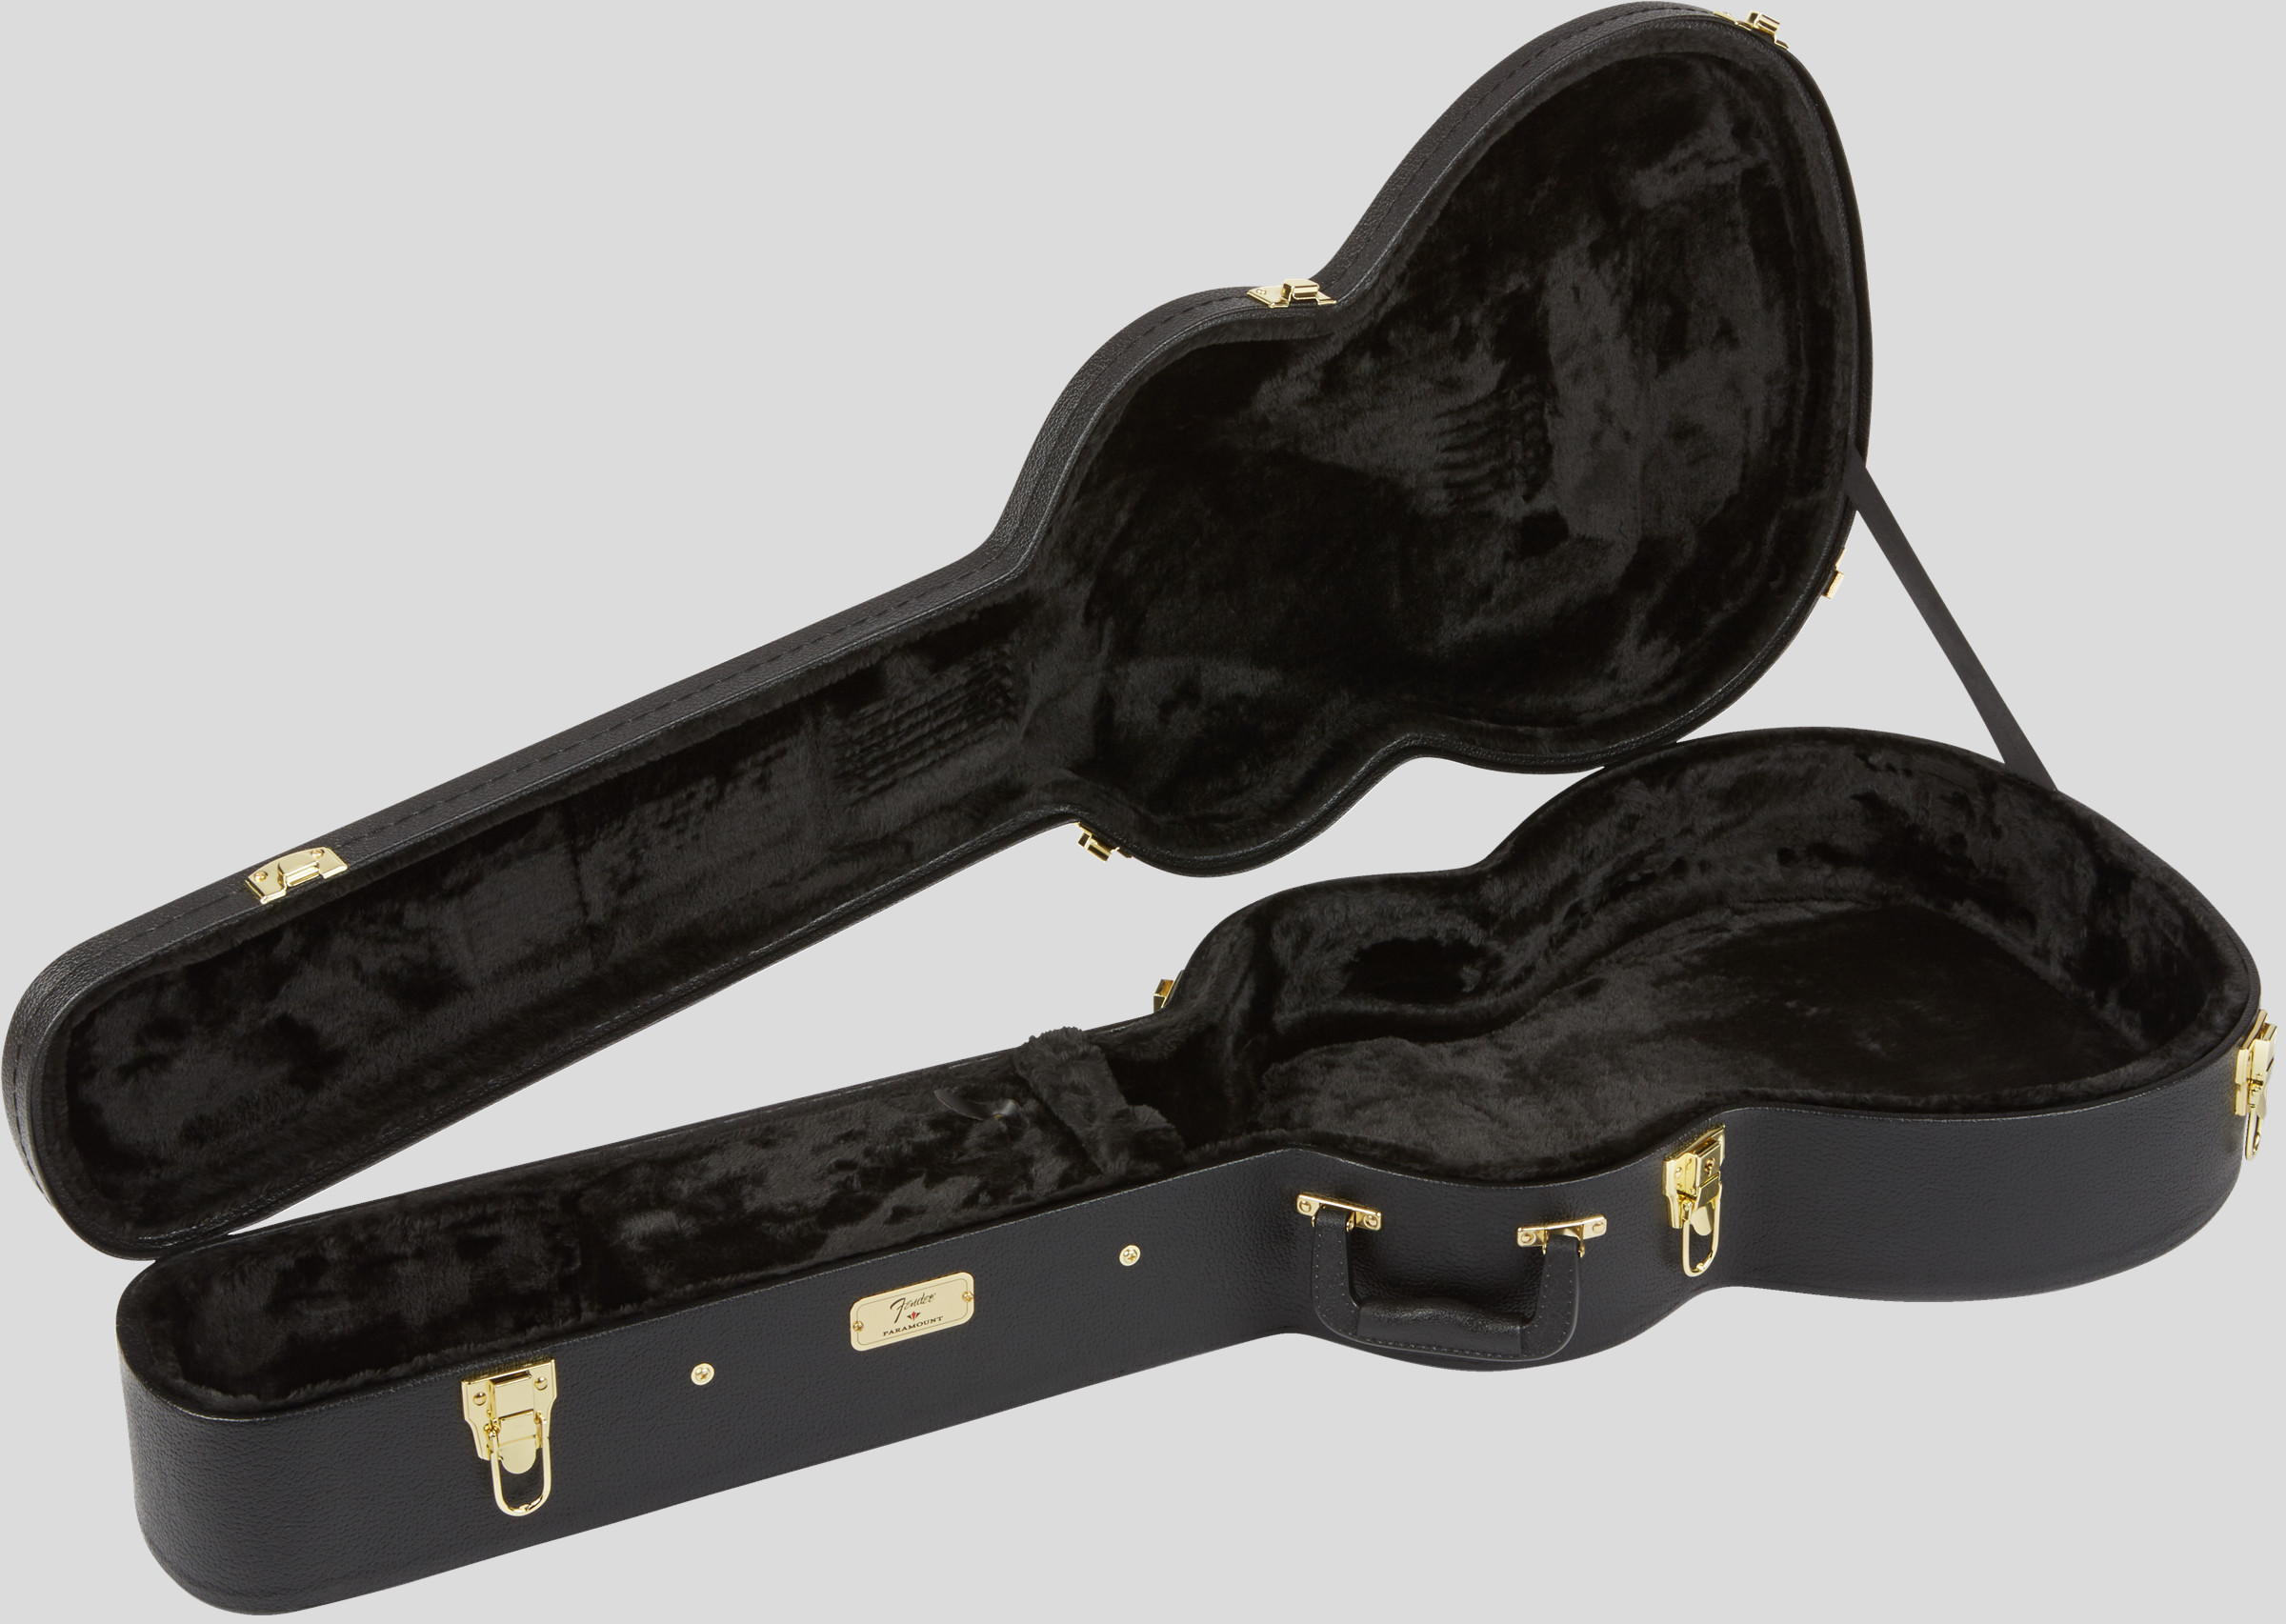 Fender Limited Edition PM-1 Deluxe Black with Ebony Fingerboard 6